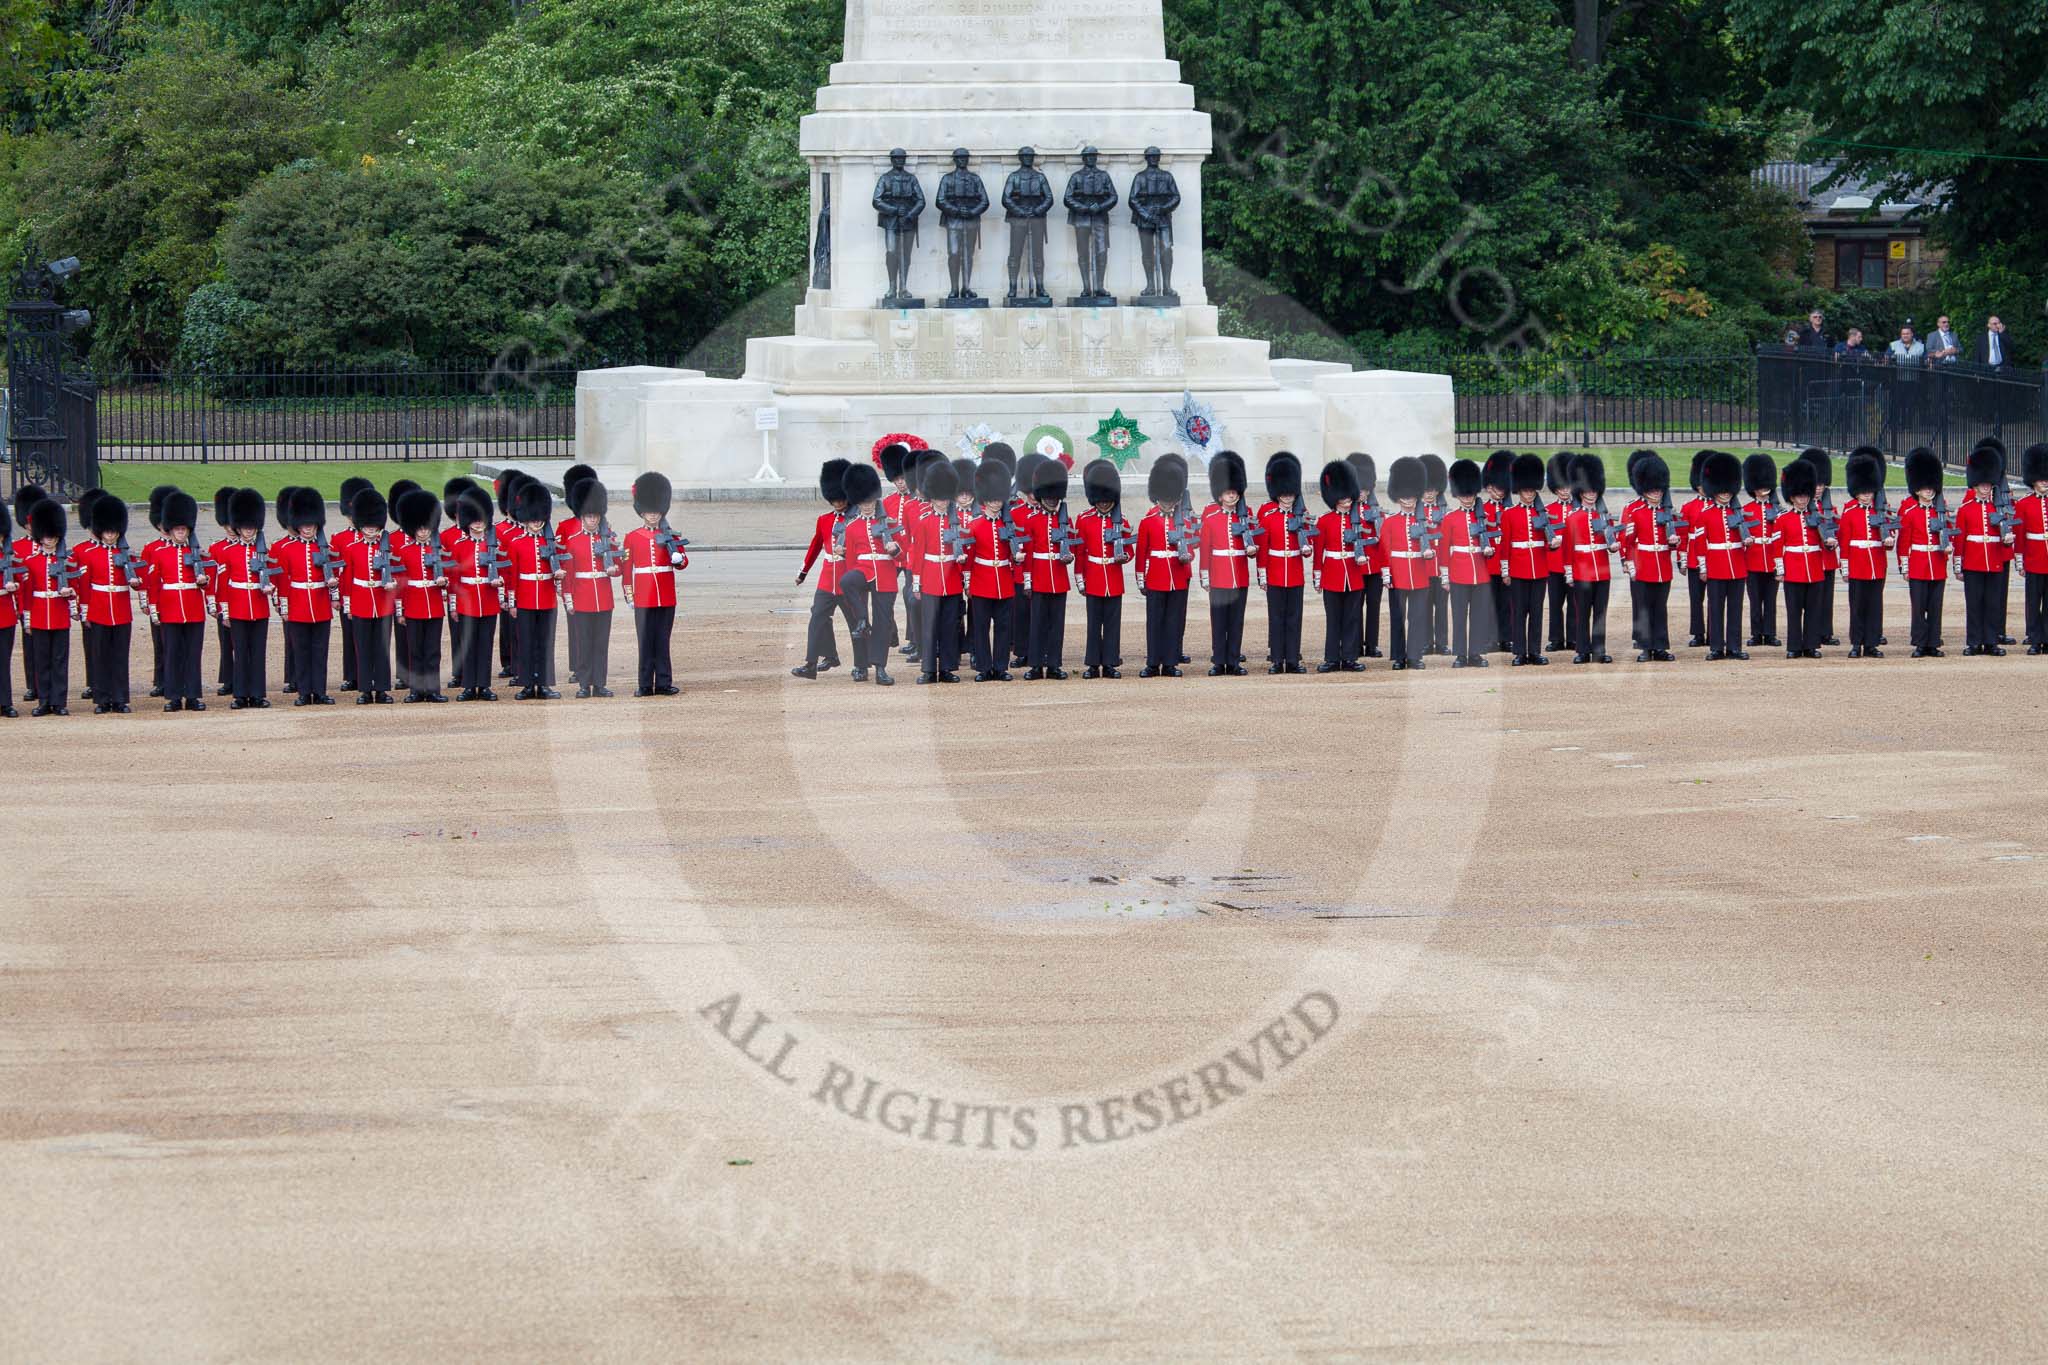 Trooping the Colour 2012: Closing thee last gap in the row of guardsmen, No. 3 Guard in front of the Guards Memorial..
Horse Guards Parade, Westminster,
London SW1,

United Kingdom,
on 16 June 2012 at 10:35, image #89